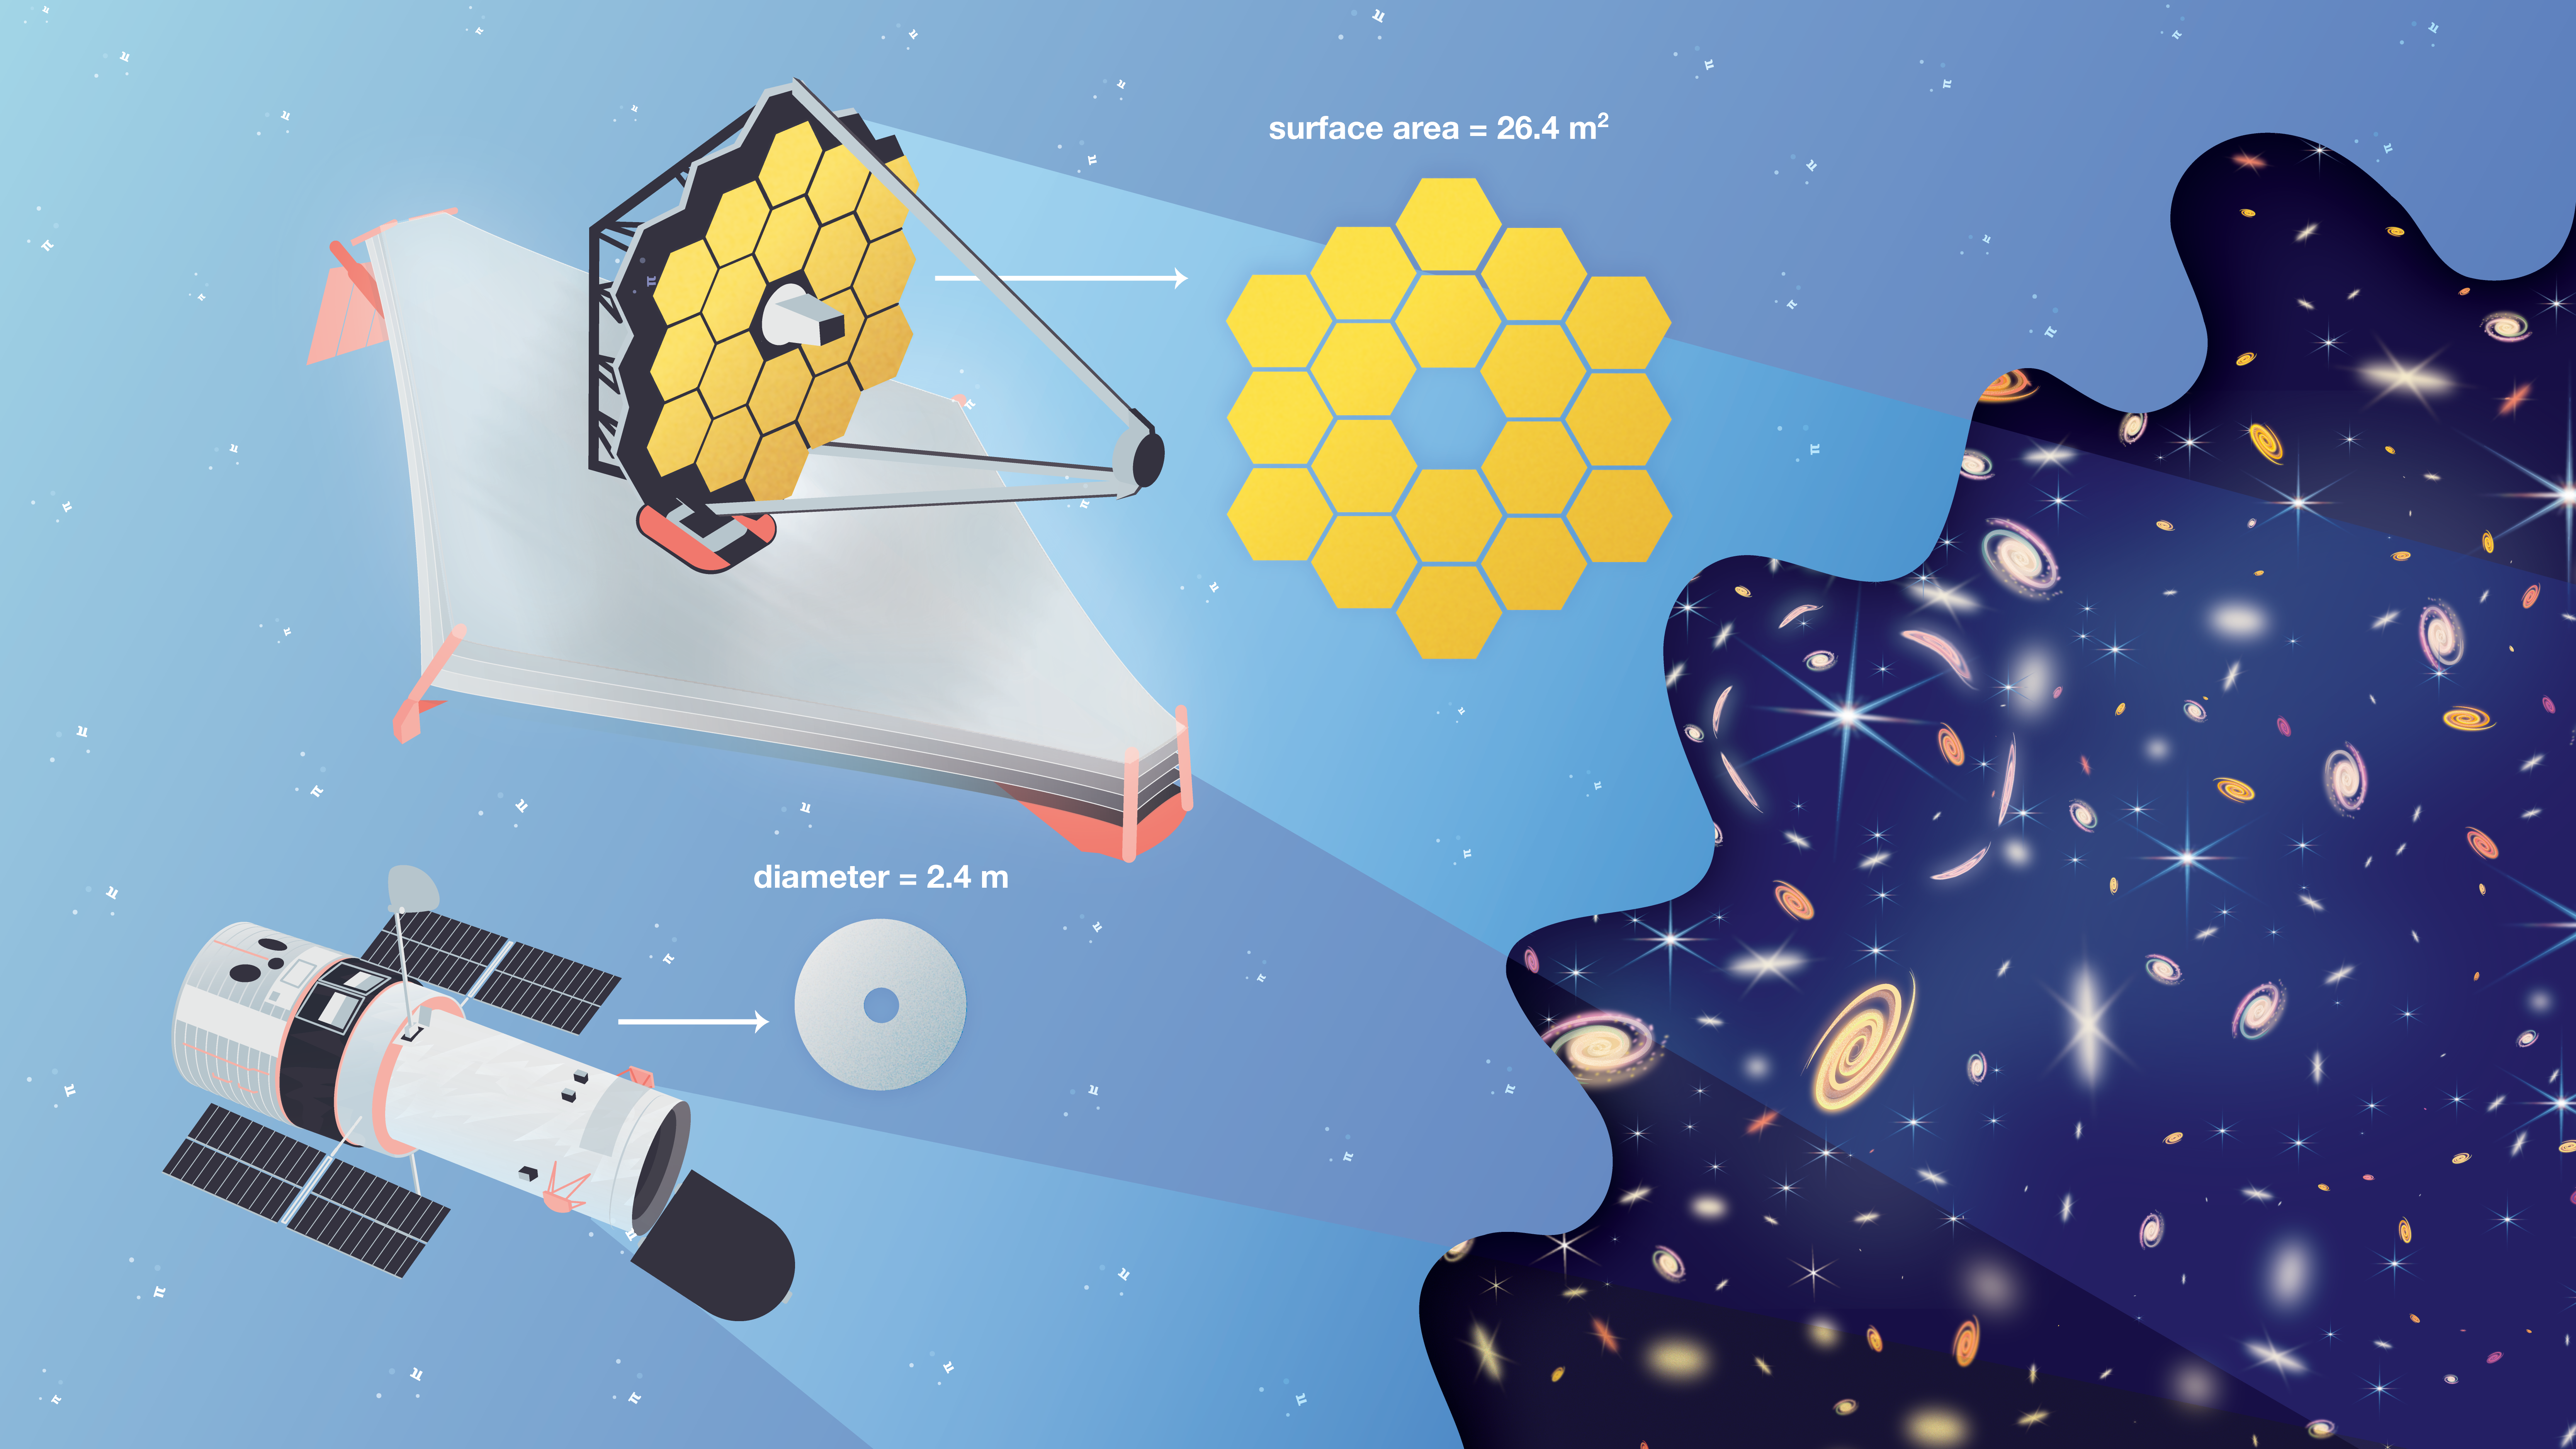 In the upper left of the image is an illustration of the James Webb Space Telescope. In the lower left is an illustration of the Hubble Space Telescope. To the right of each telescope is an arrow pointing to a face-on view of its primary mirror. Next to the Webb telescope is a primary mirror composed of 18 hexagonal gold-plated mirrors arranged in a roughly circular shape. Above the mirror is text stating the surface area is 26.4 square meters. Next to the Hubble telescope is a round primary mirror with text stating the diameter is 2.4 meters. Both telescopes are in front of an illustrated star field. On the right hand side of the image is a view of space containing stars, spiral galaxies, and elliptical galaxies. Some of the galaxies are warped as a result of gravitational lensing. The text of the Rad Reflection problem is shown on the right.